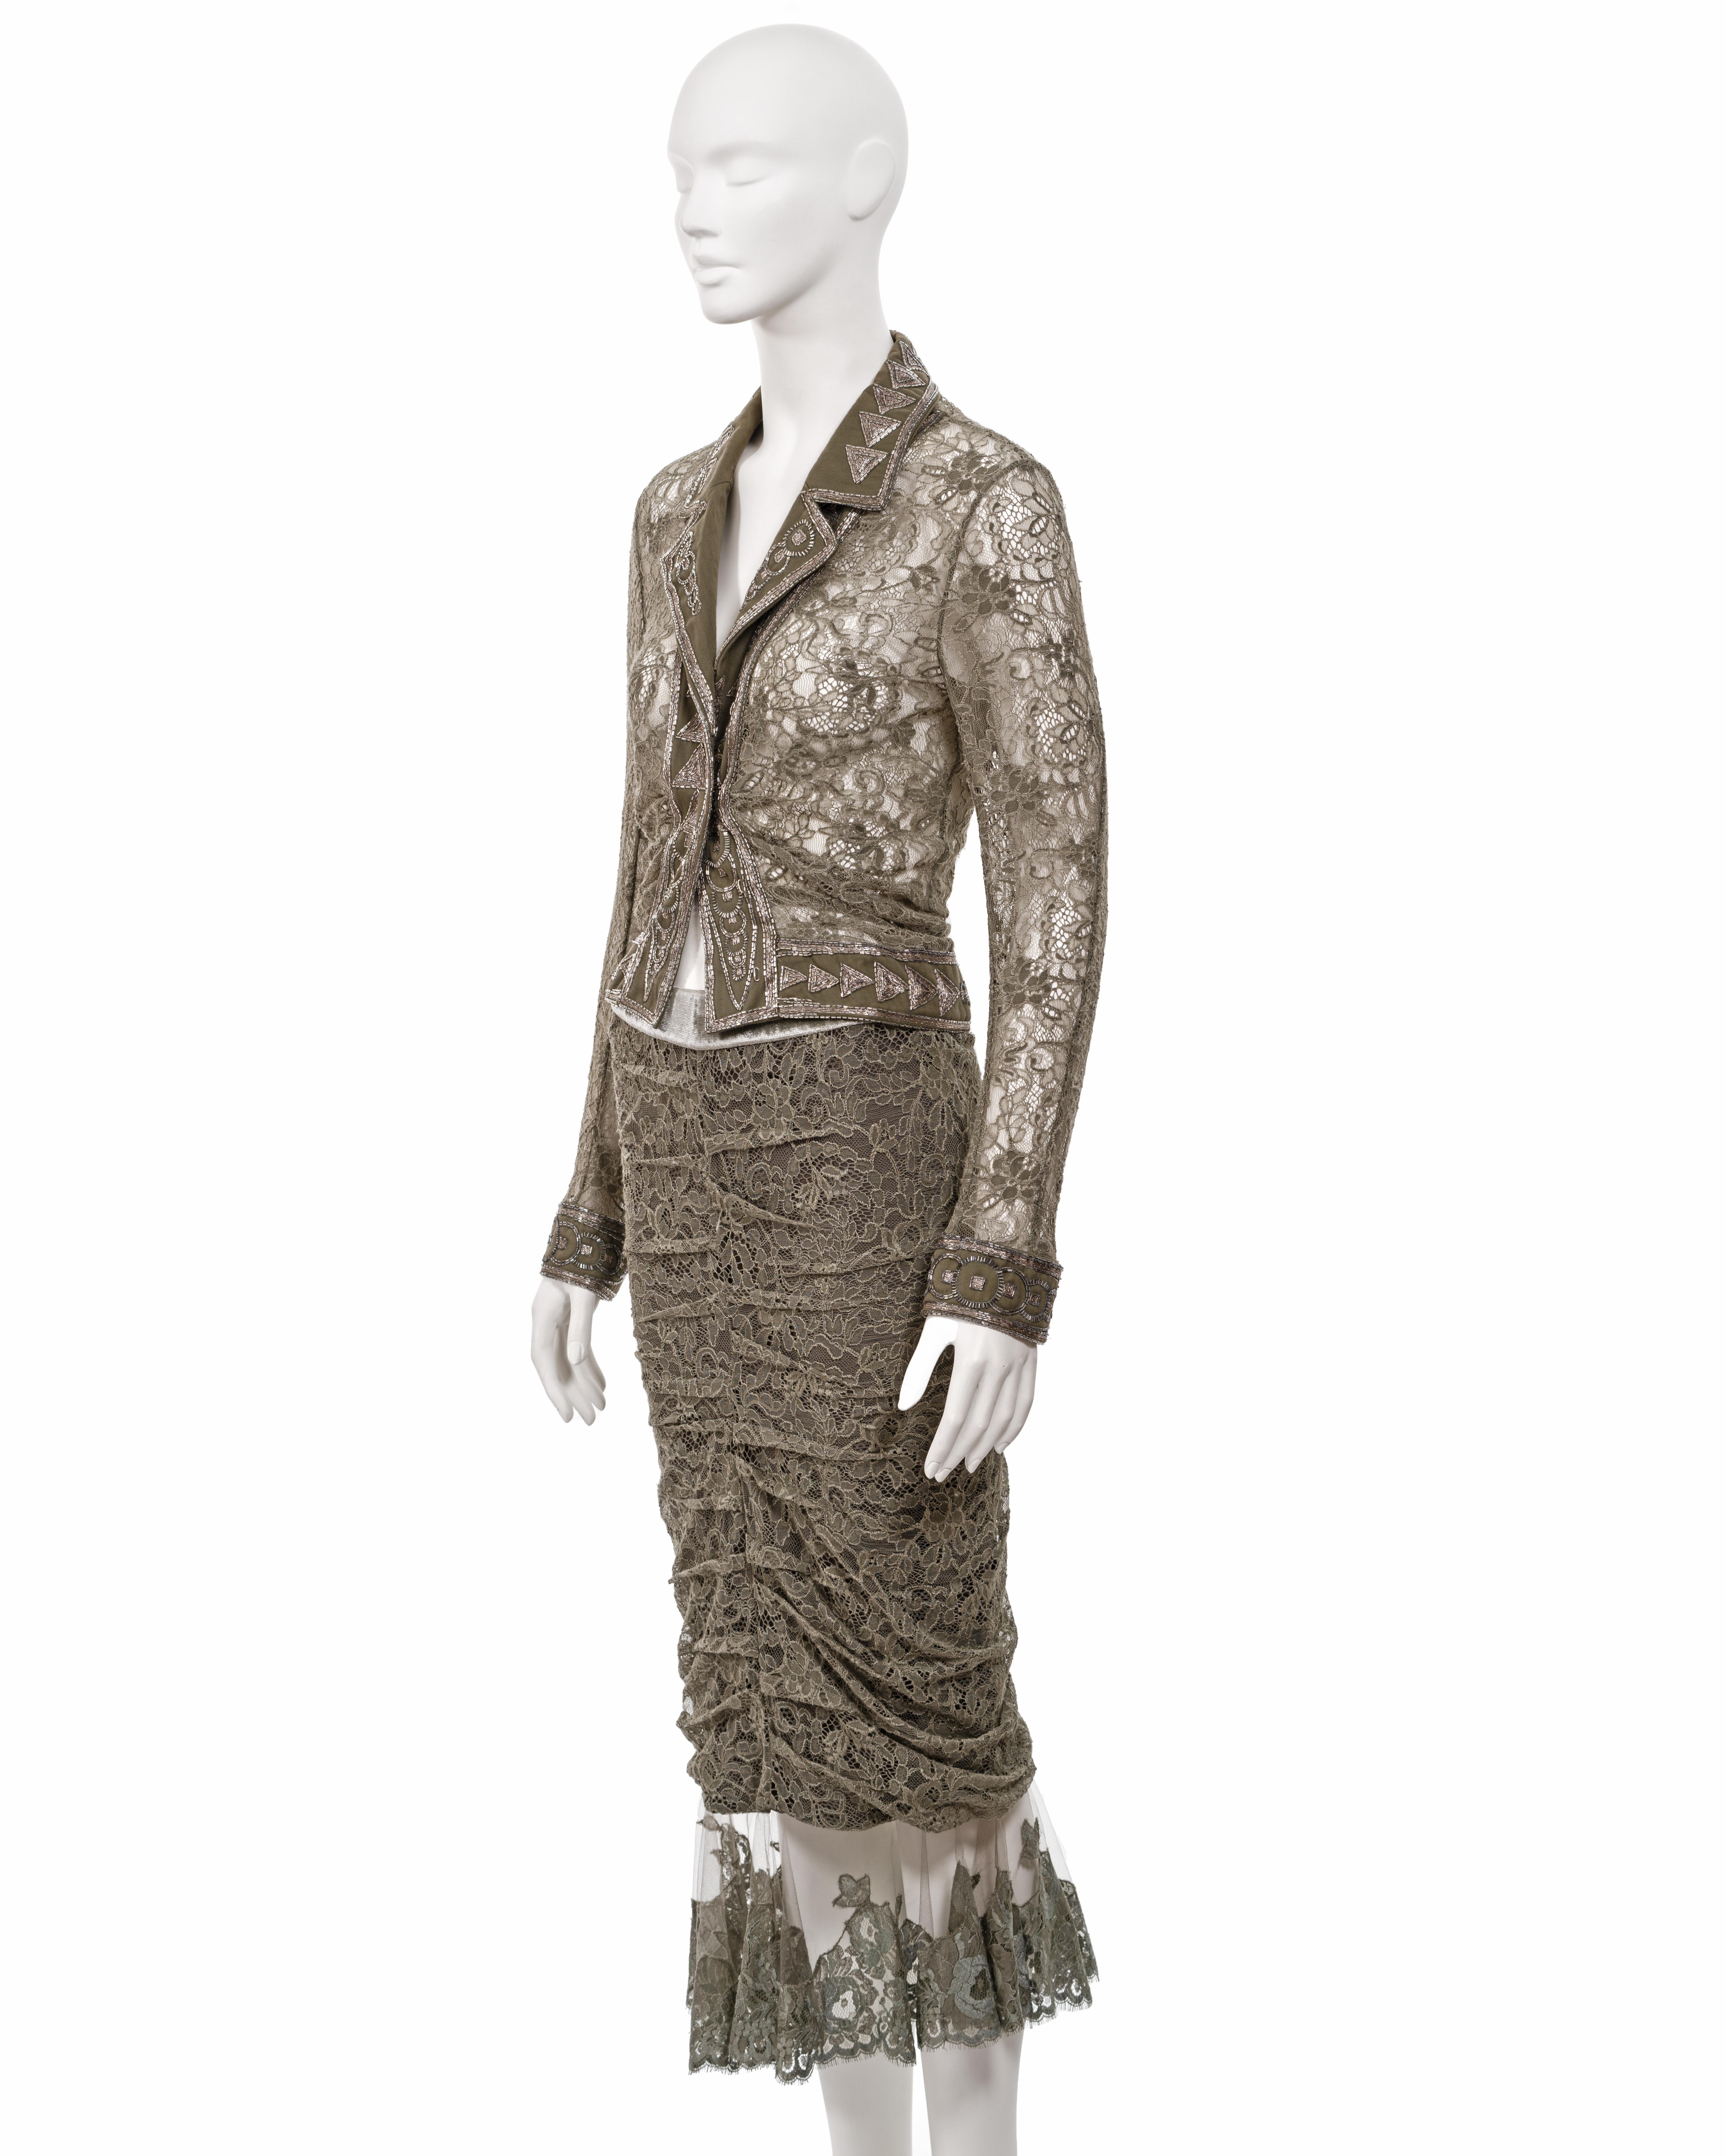 Christian Dior by John Galliano green lace beaded skirt suit, fw 2003 For Sale 2